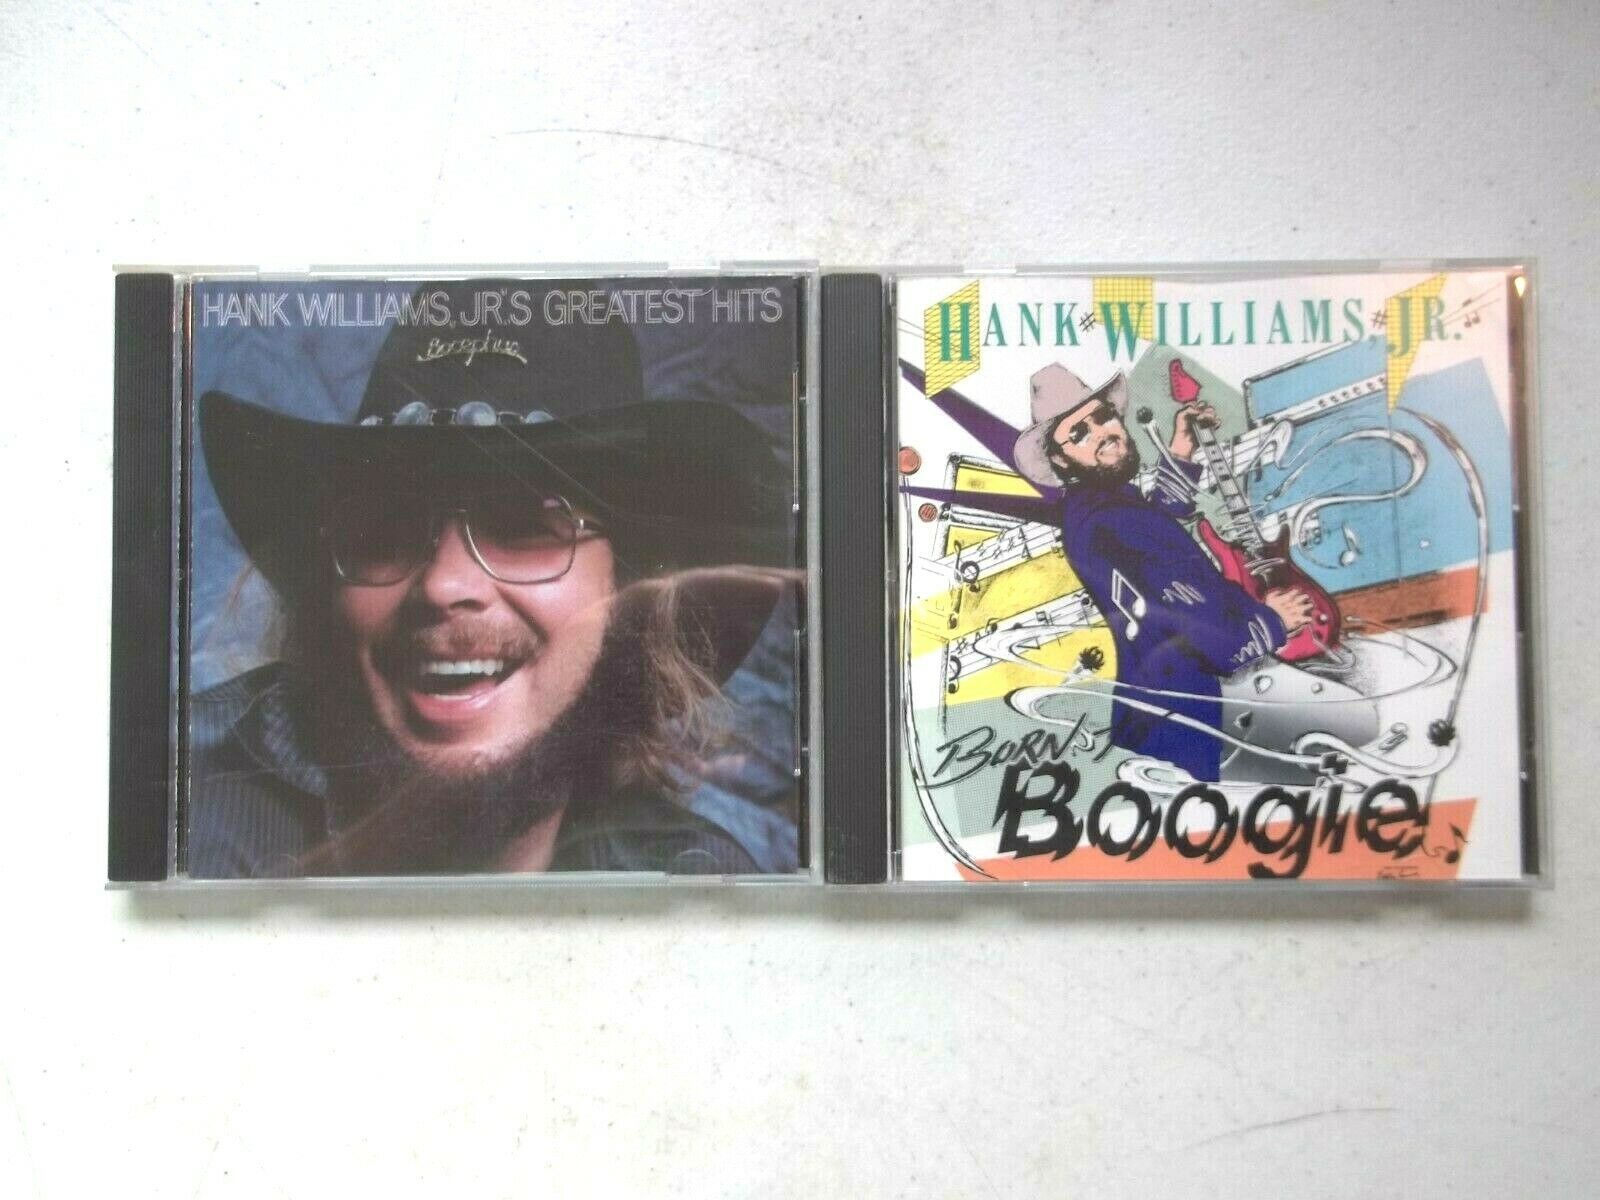 Hank Williams Jr. Born to Boogie & Greatest Hits; 2 CDs - CDs